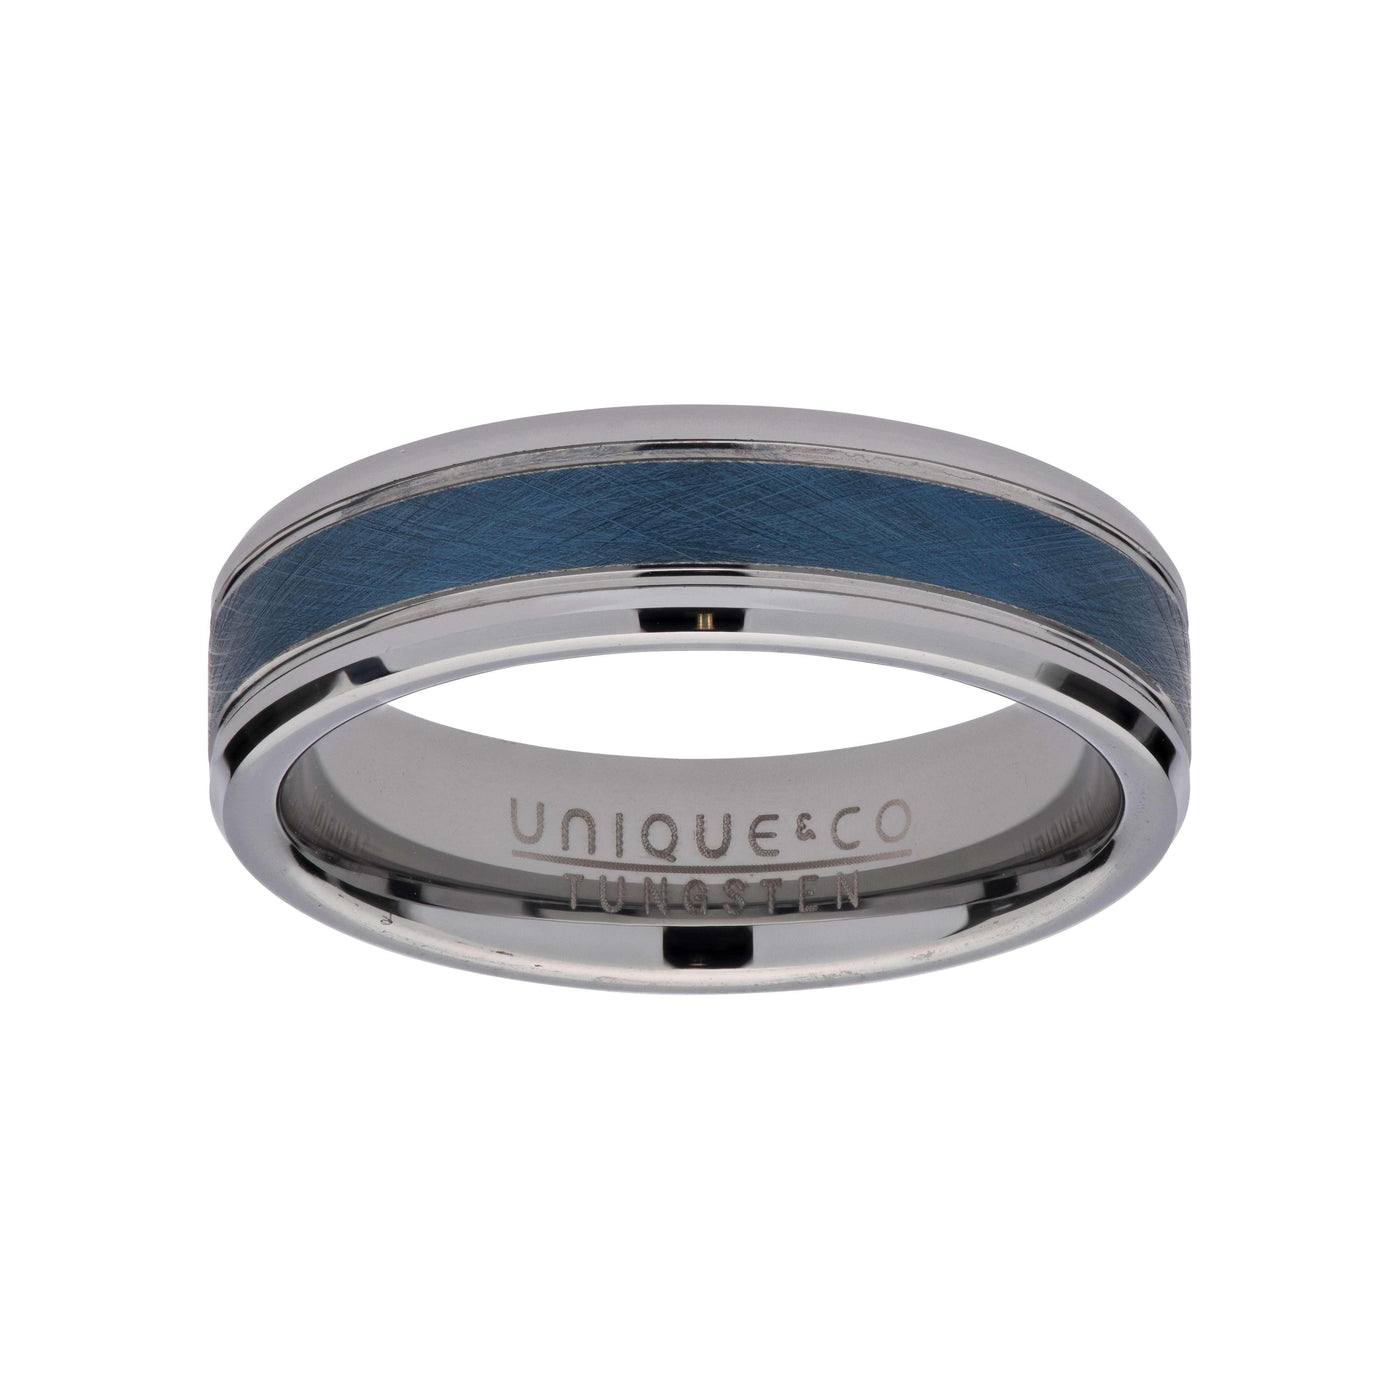 Unique & Co 7mm Tungsten Ring with Blue IP - Rococo Jewellery